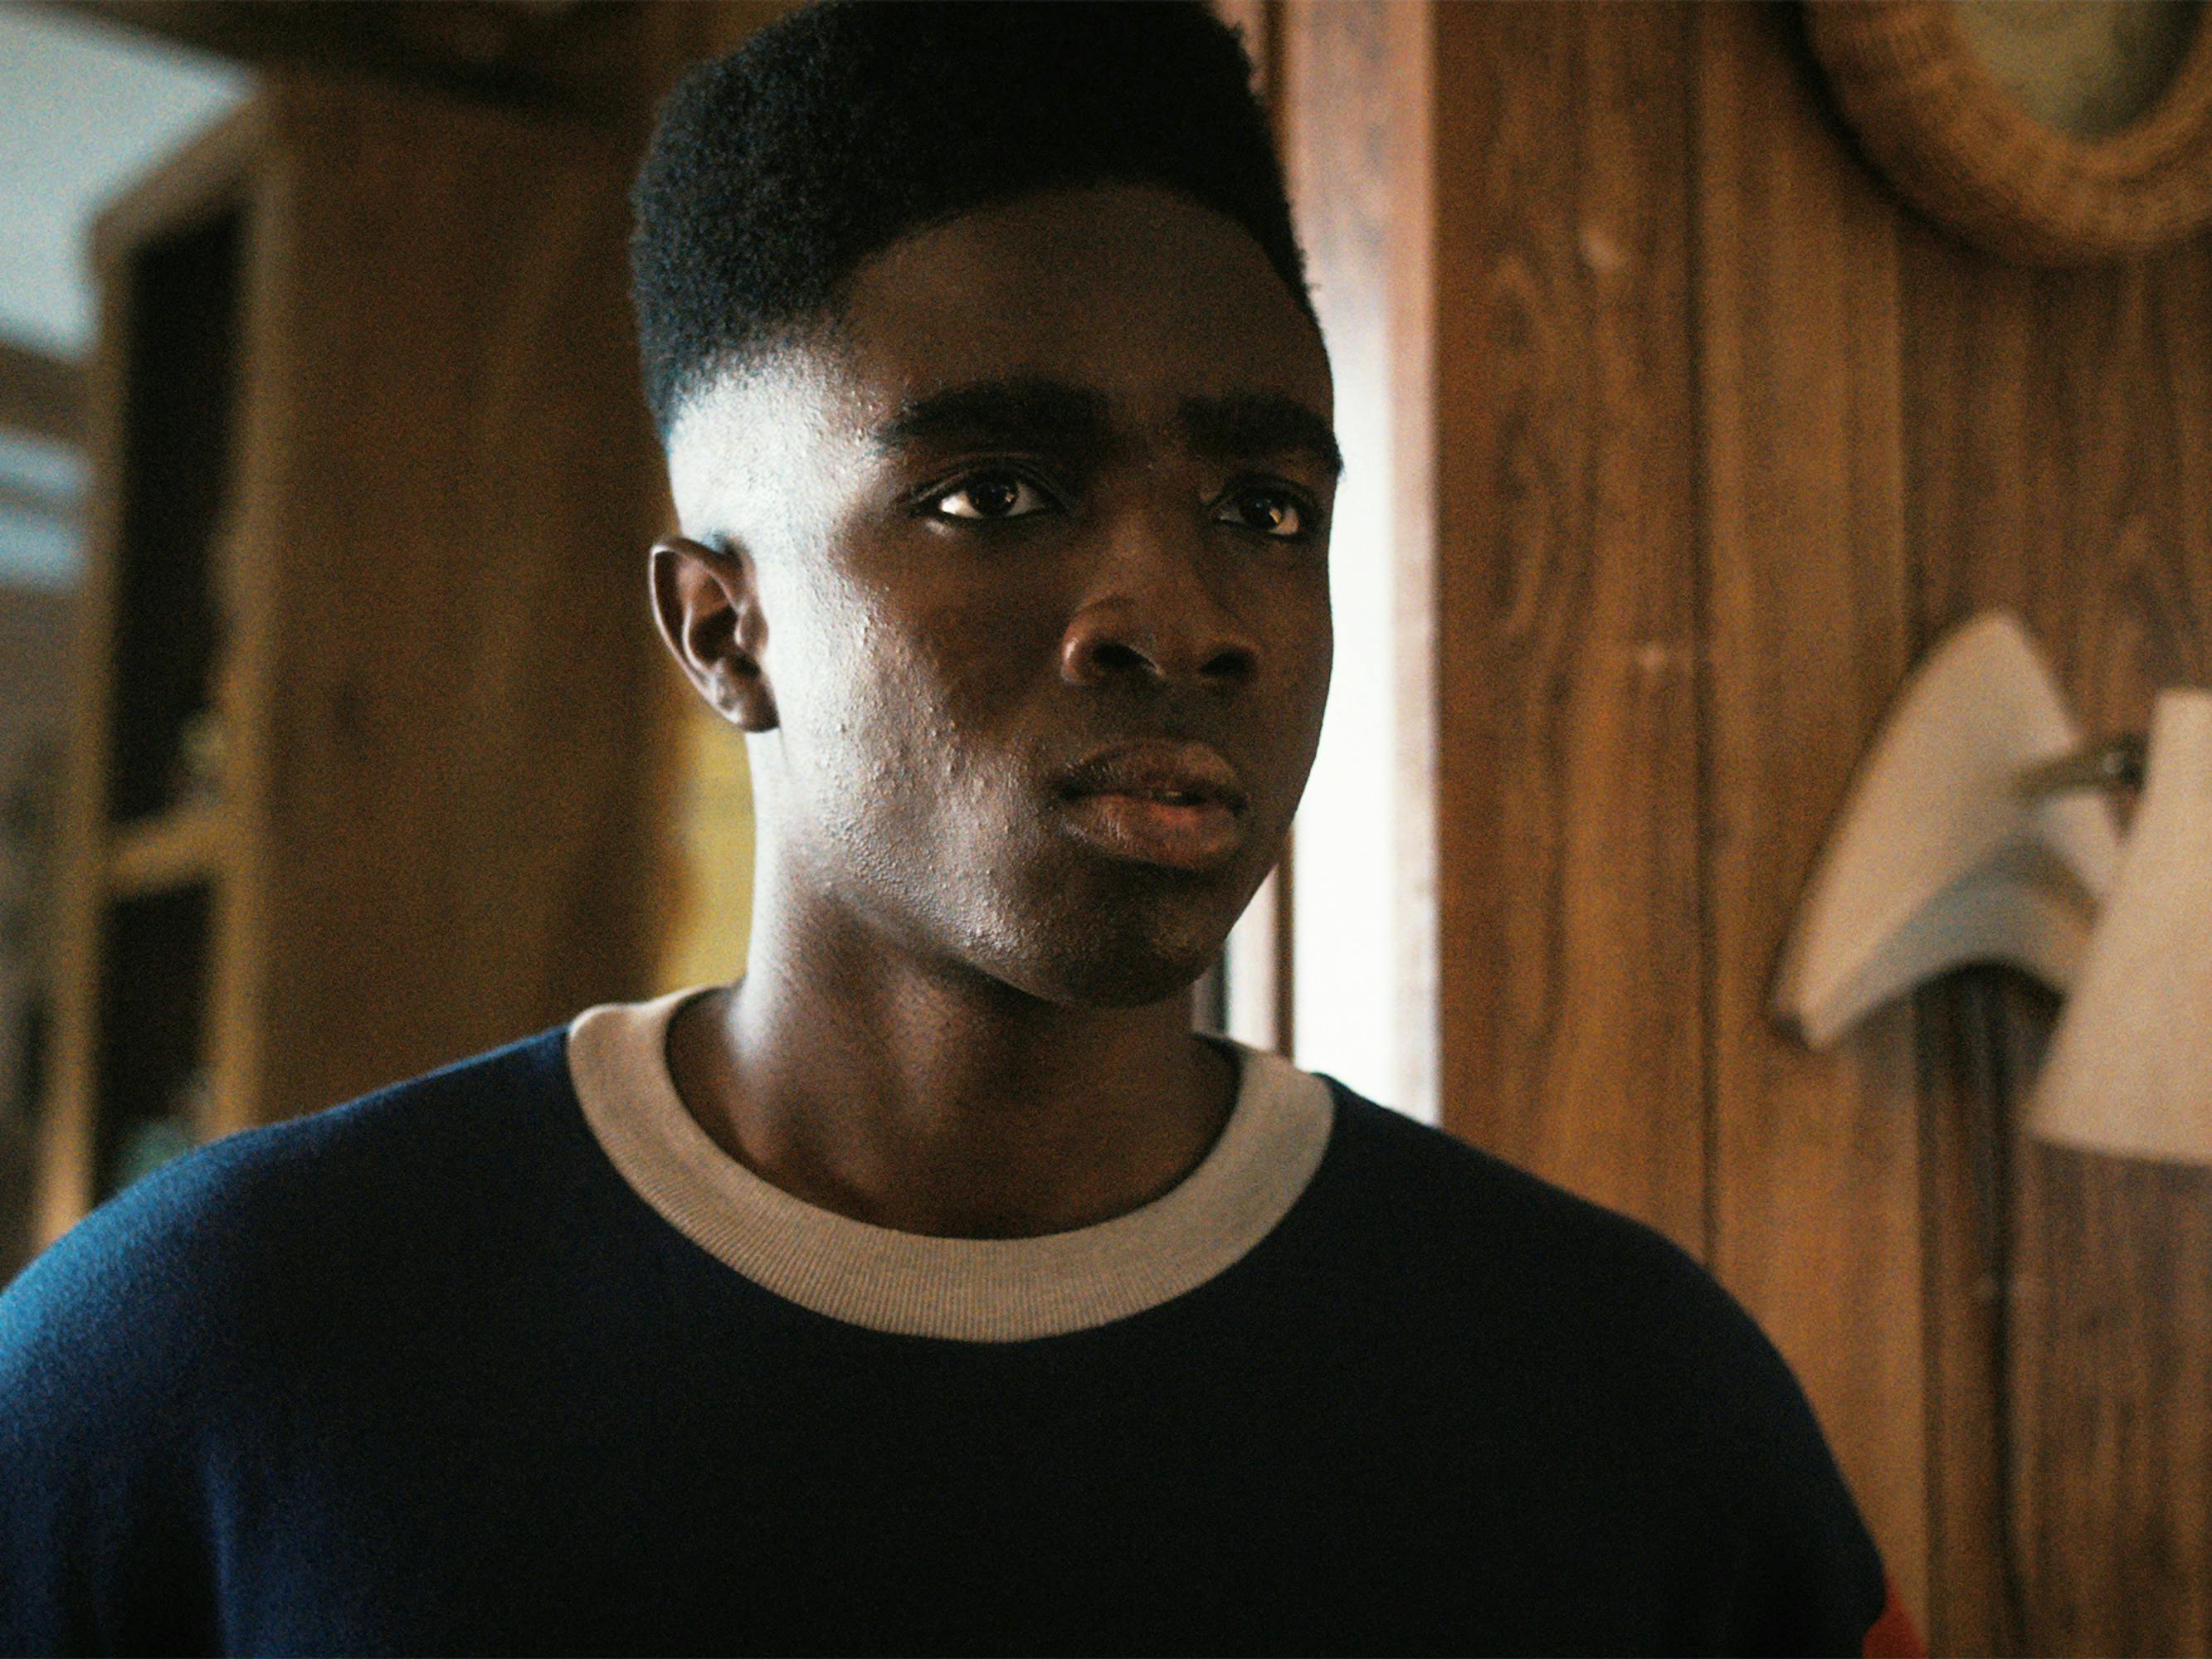 Lucas Sinclair (Caleb McLaughlin) wears a navy shirt lined with white.